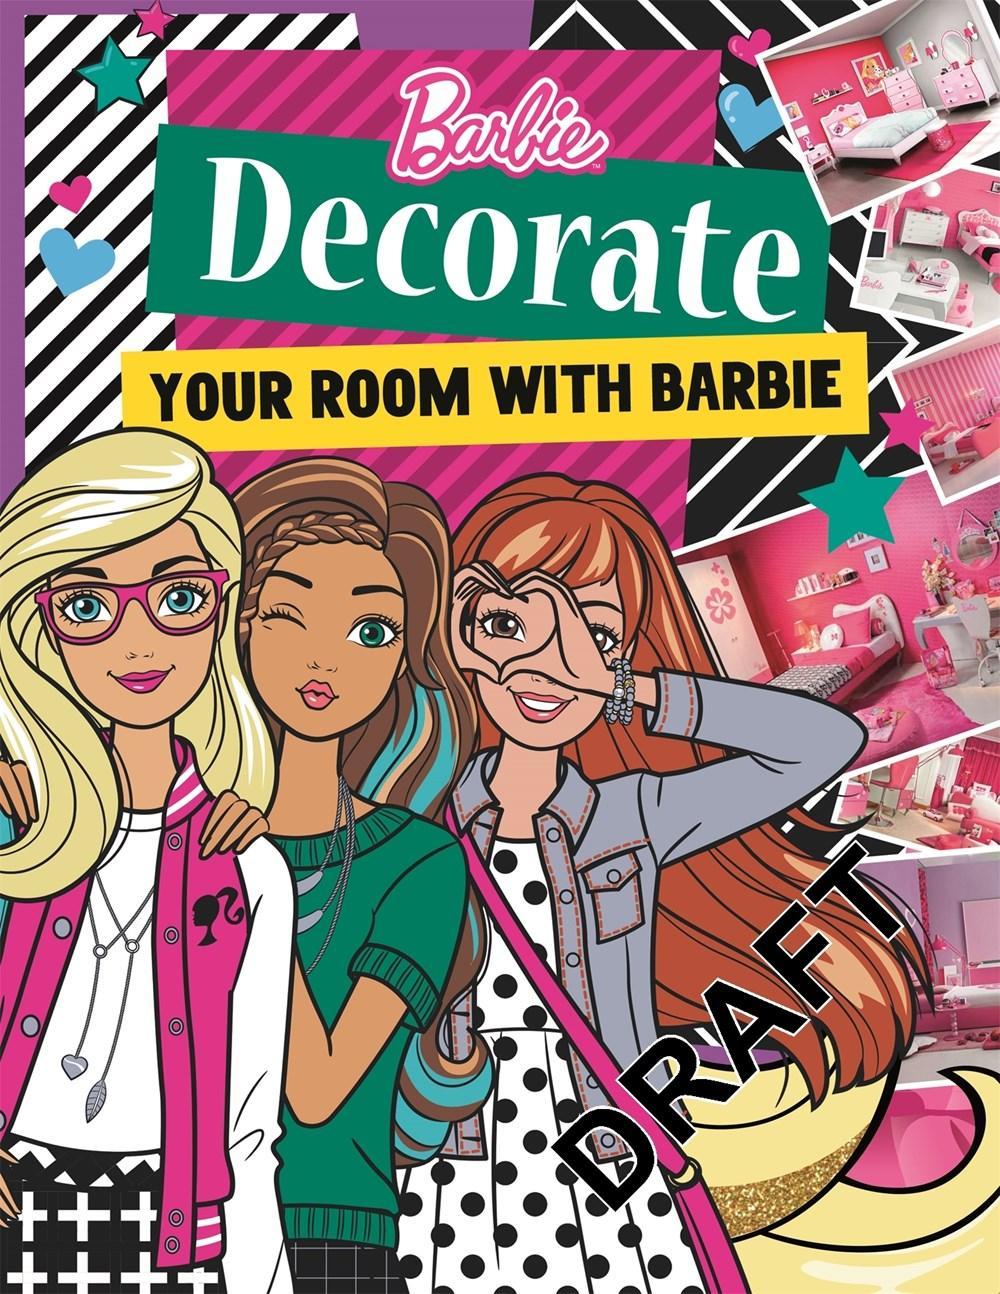 EDDA USA JUNE 2017 Decorate Your Room With Barbie Have fun with Barbie while learning the inside tips and tricks from interior designers We all want to make our homes an extension of our character